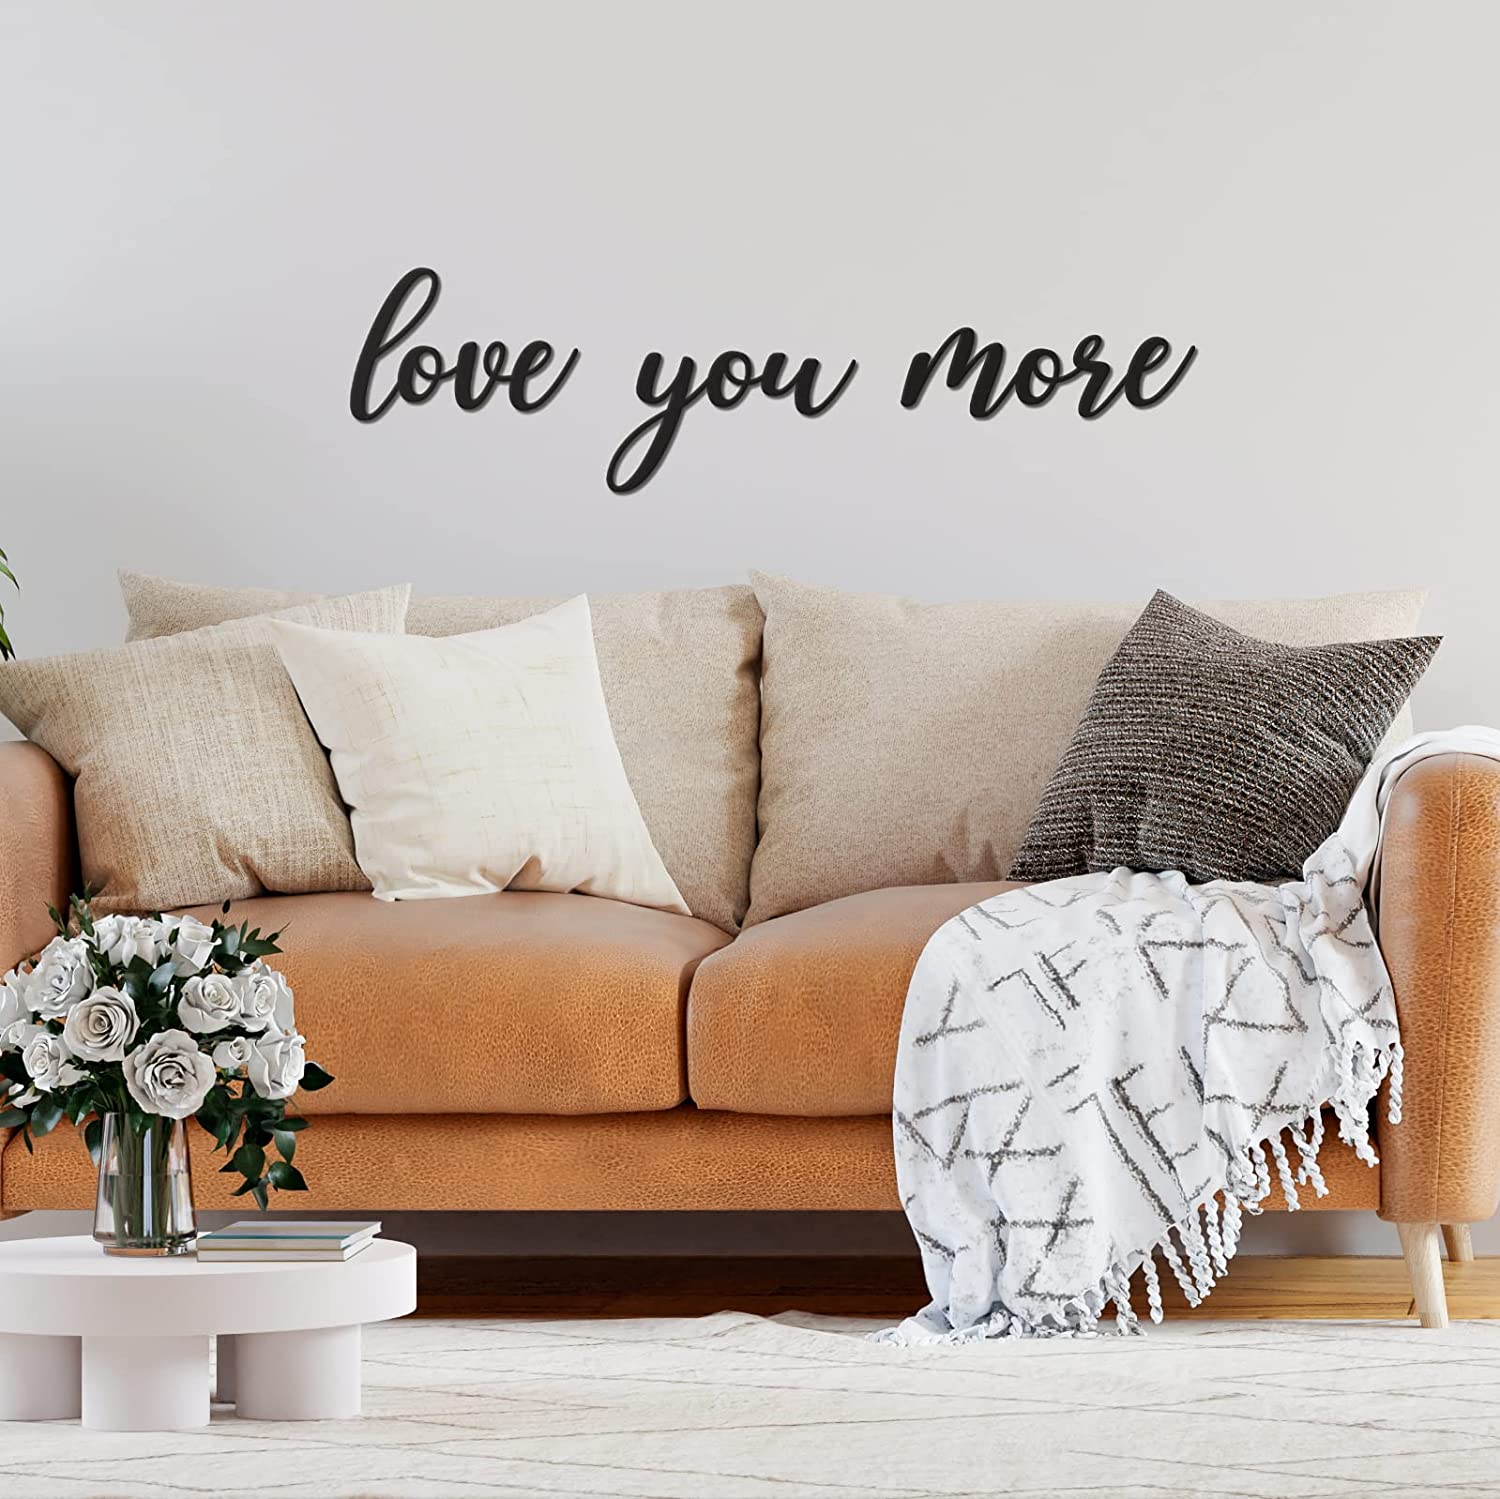 Love You More Sign Metal Wall Decor - 25"X21" Black Modern Beautiful I Love You More Sign